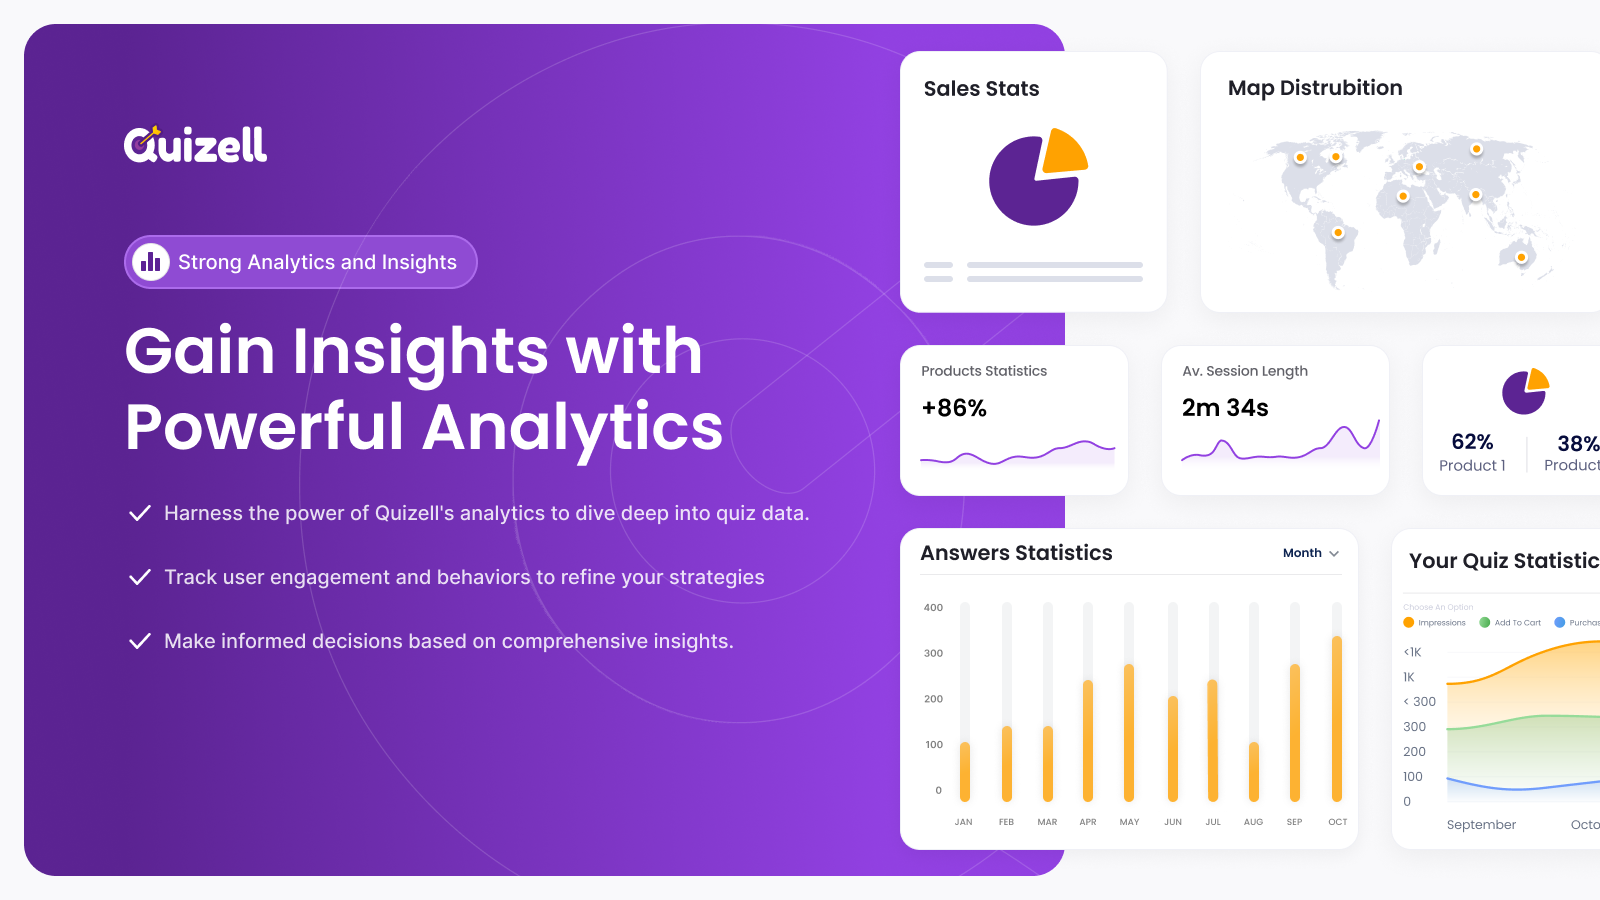 Gain Insights with Powerful Analytics